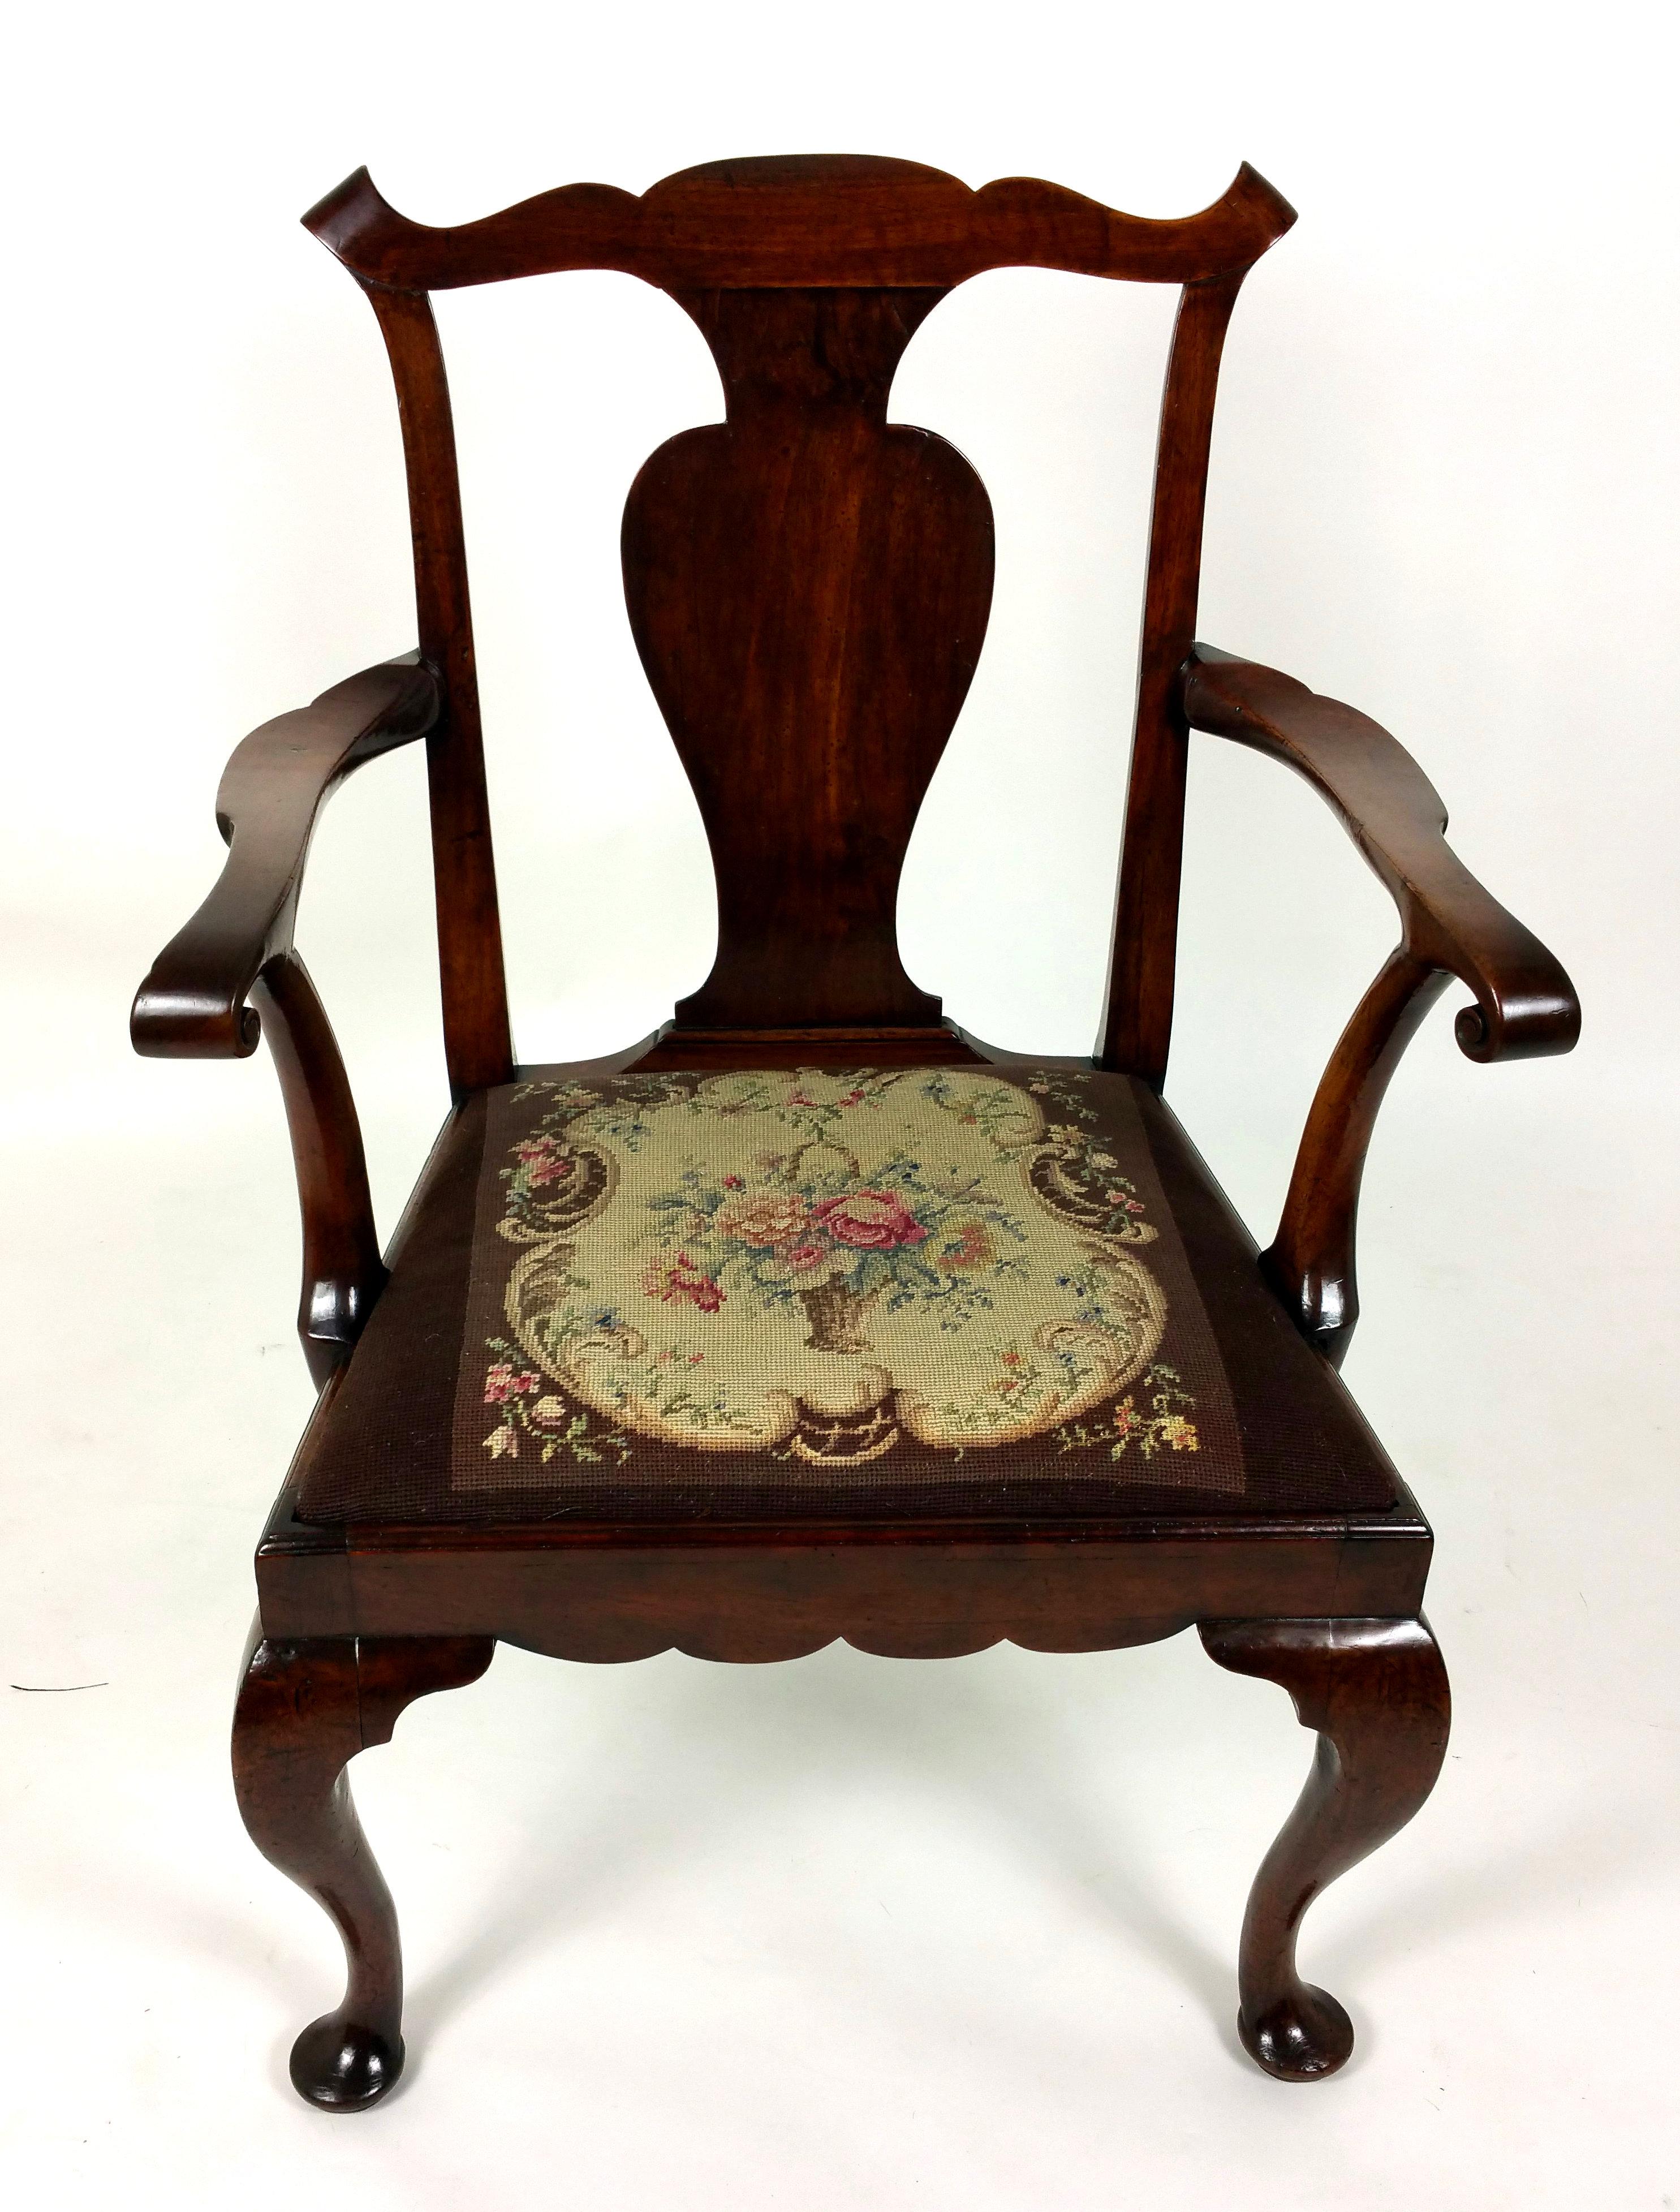 Hand-Crafted 18th Century Solid Walnut Splat Back Elbow Chair